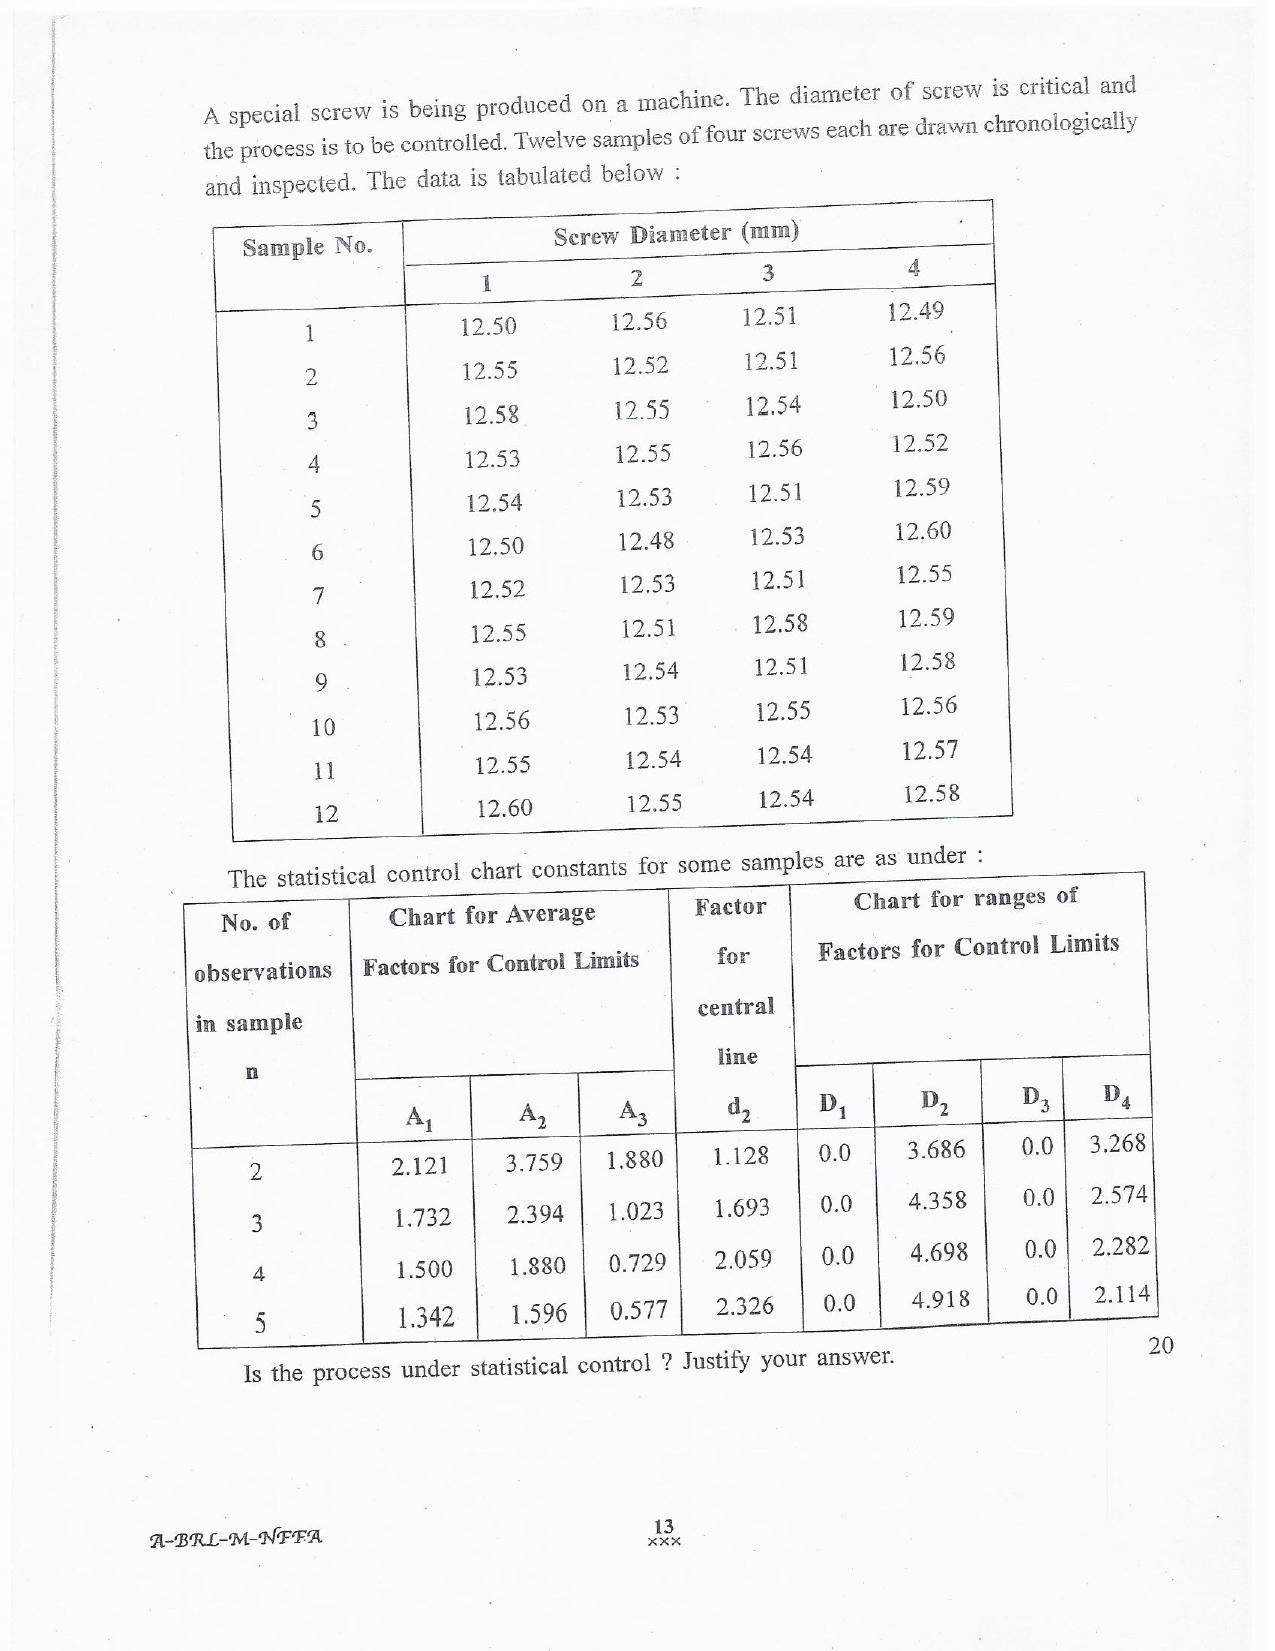 lakshadweep.gov.in Mechanical Engineering Question Papers - Page 13